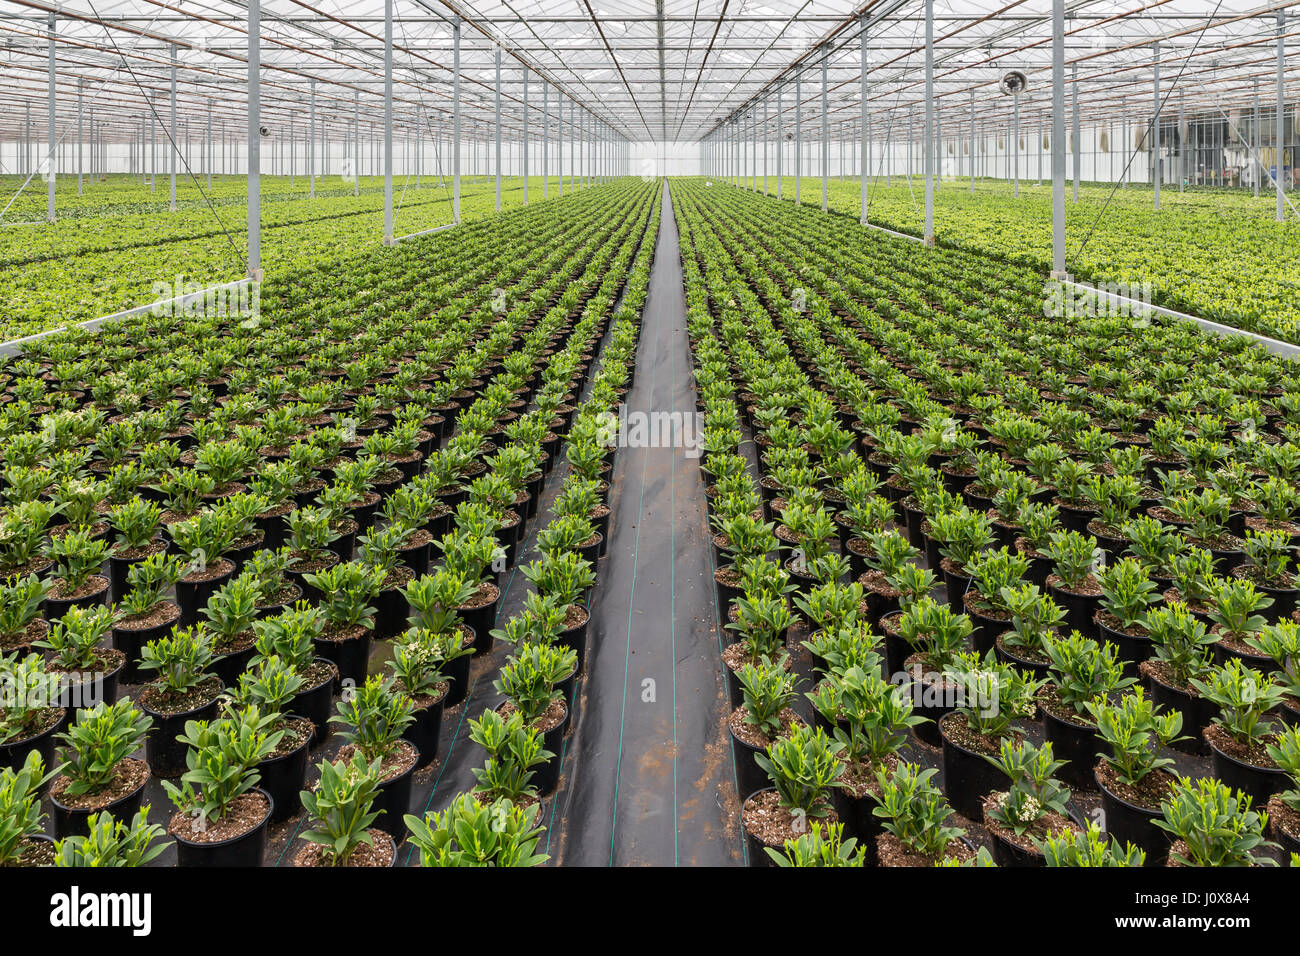 Dutch greenhouse with cultivation of Skimmia plants Stock Photo